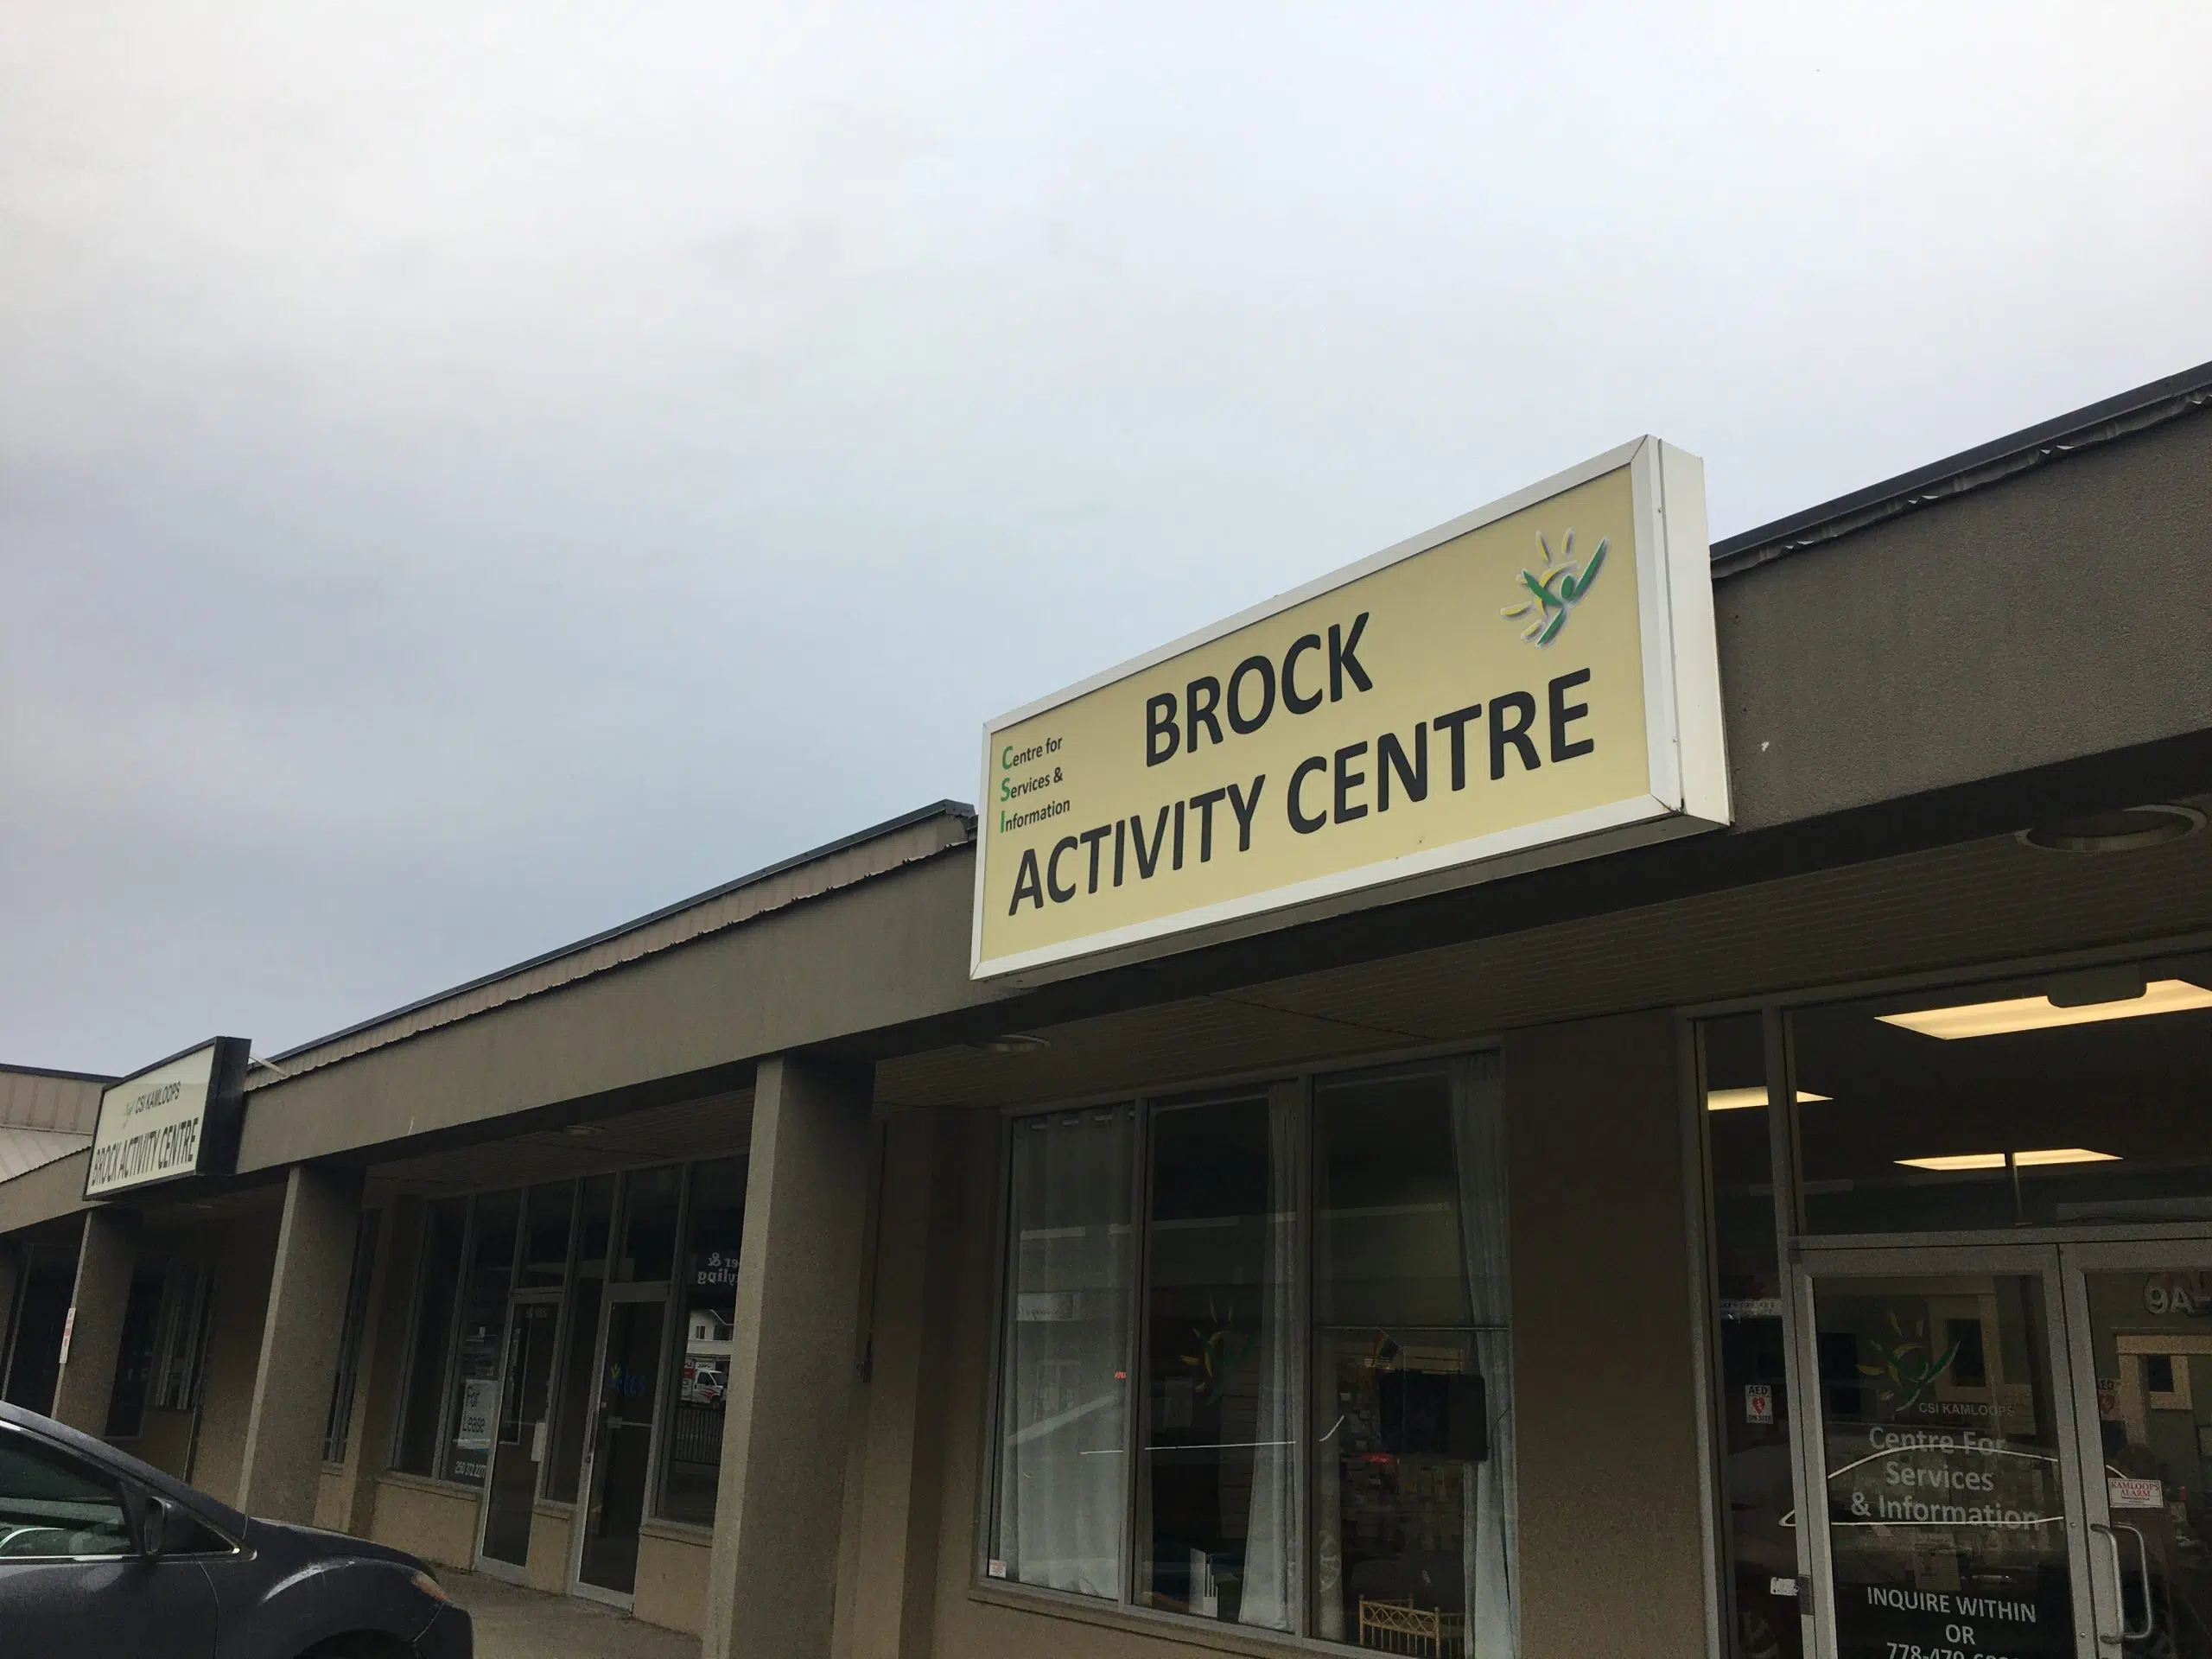 Centre for Seniors Information Kamloops to close Brock Activity Centre in June